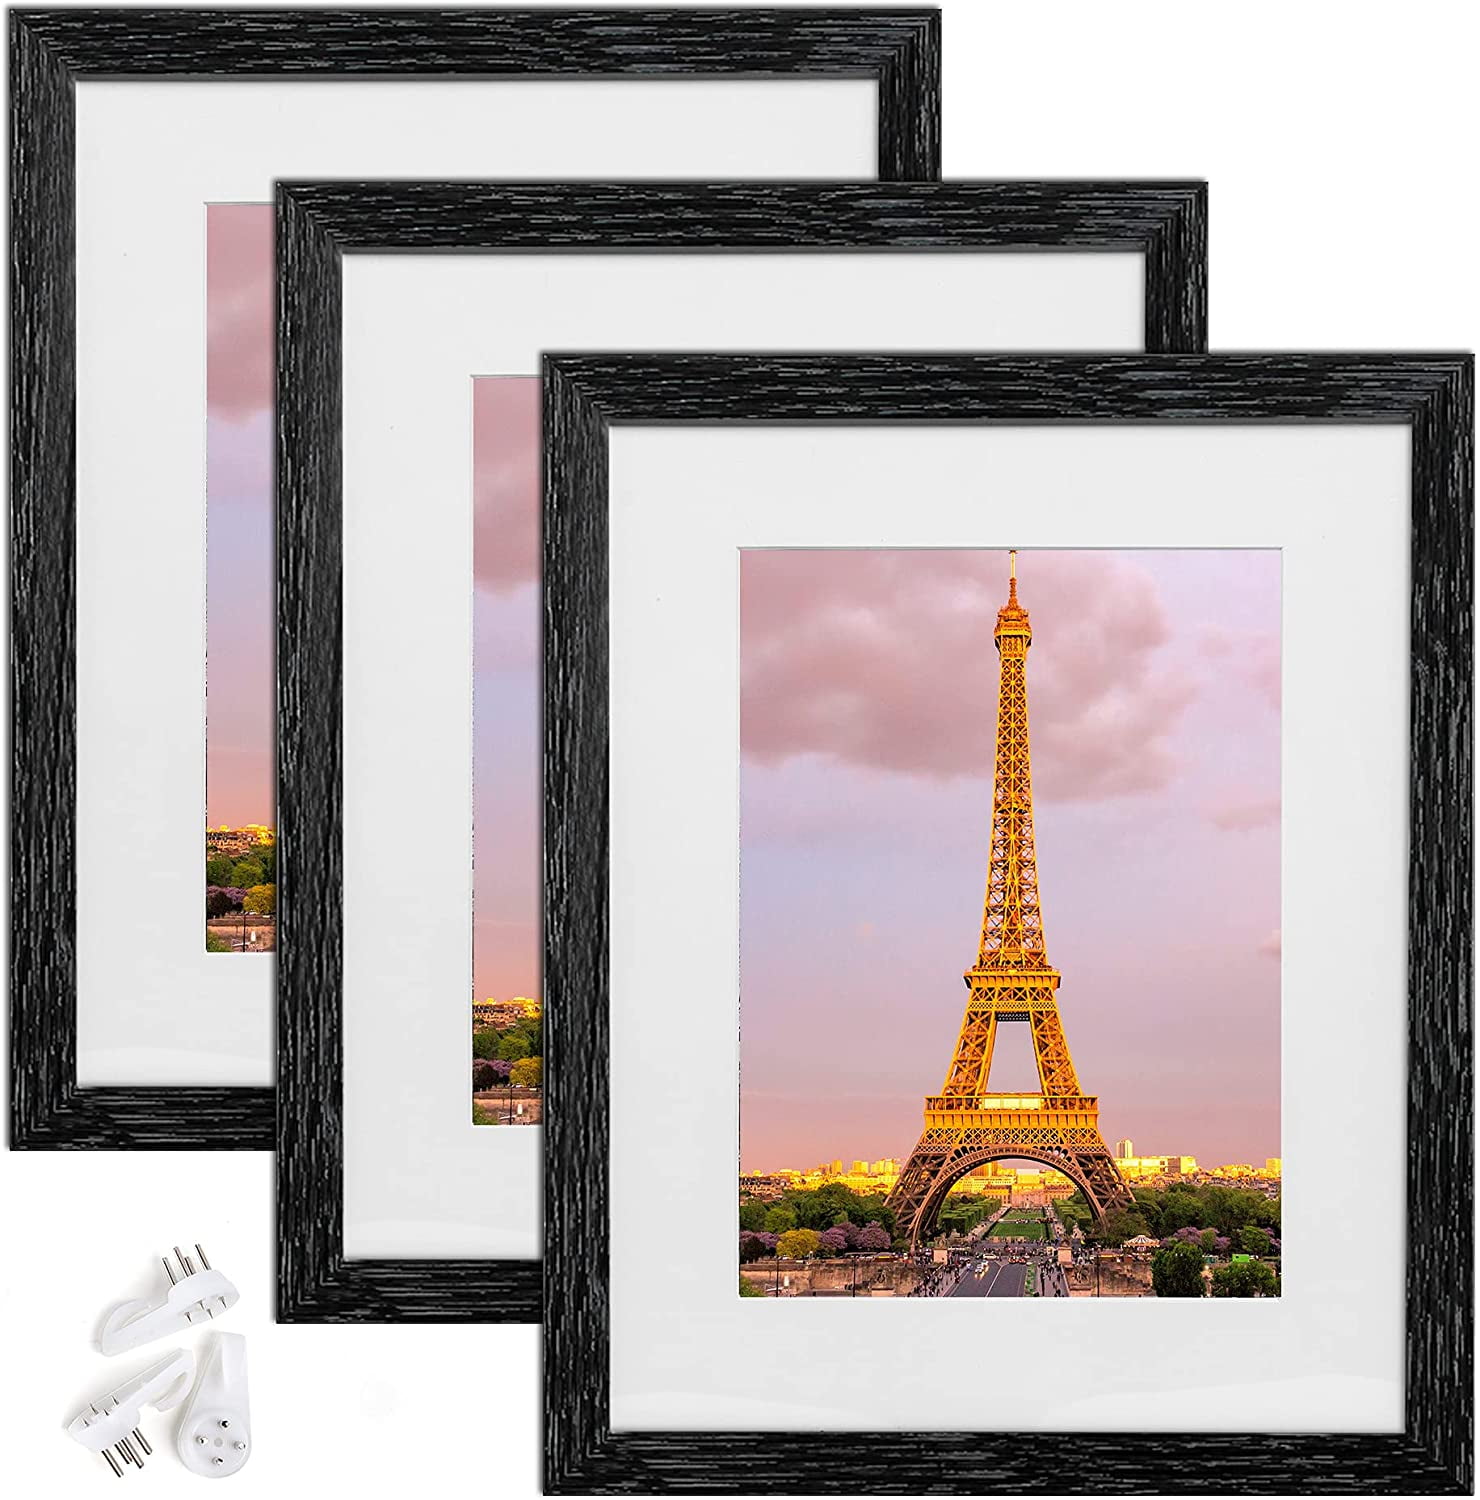 Home Decor Poster,Durable Plastic Glazing Format Picture Frame 11x17 Wall Black 